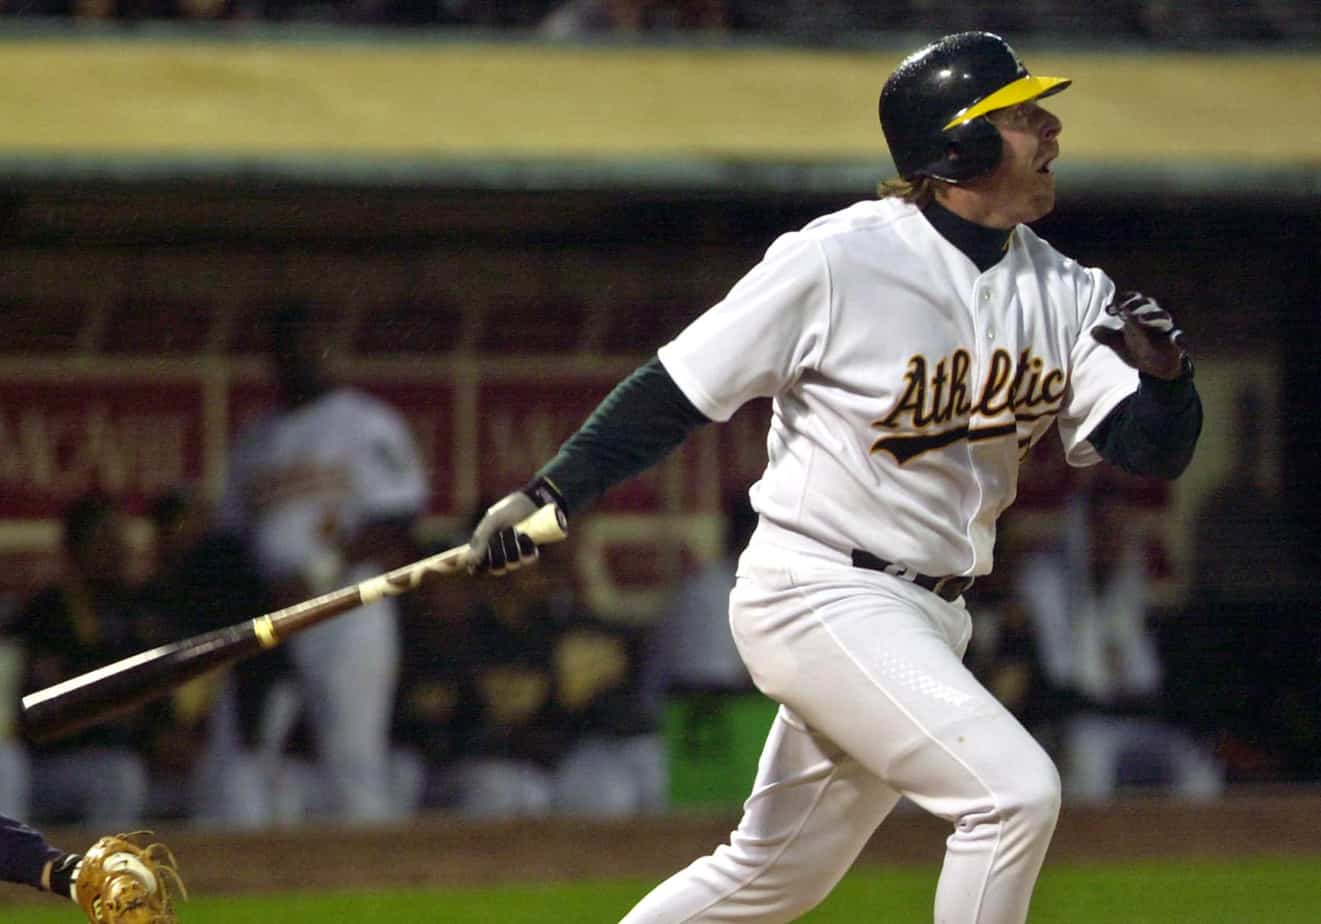 The cause of death has been revealed for former MLB player Jeremy Giambi after it was announced earlier in the week that he had passed away at 47 years old